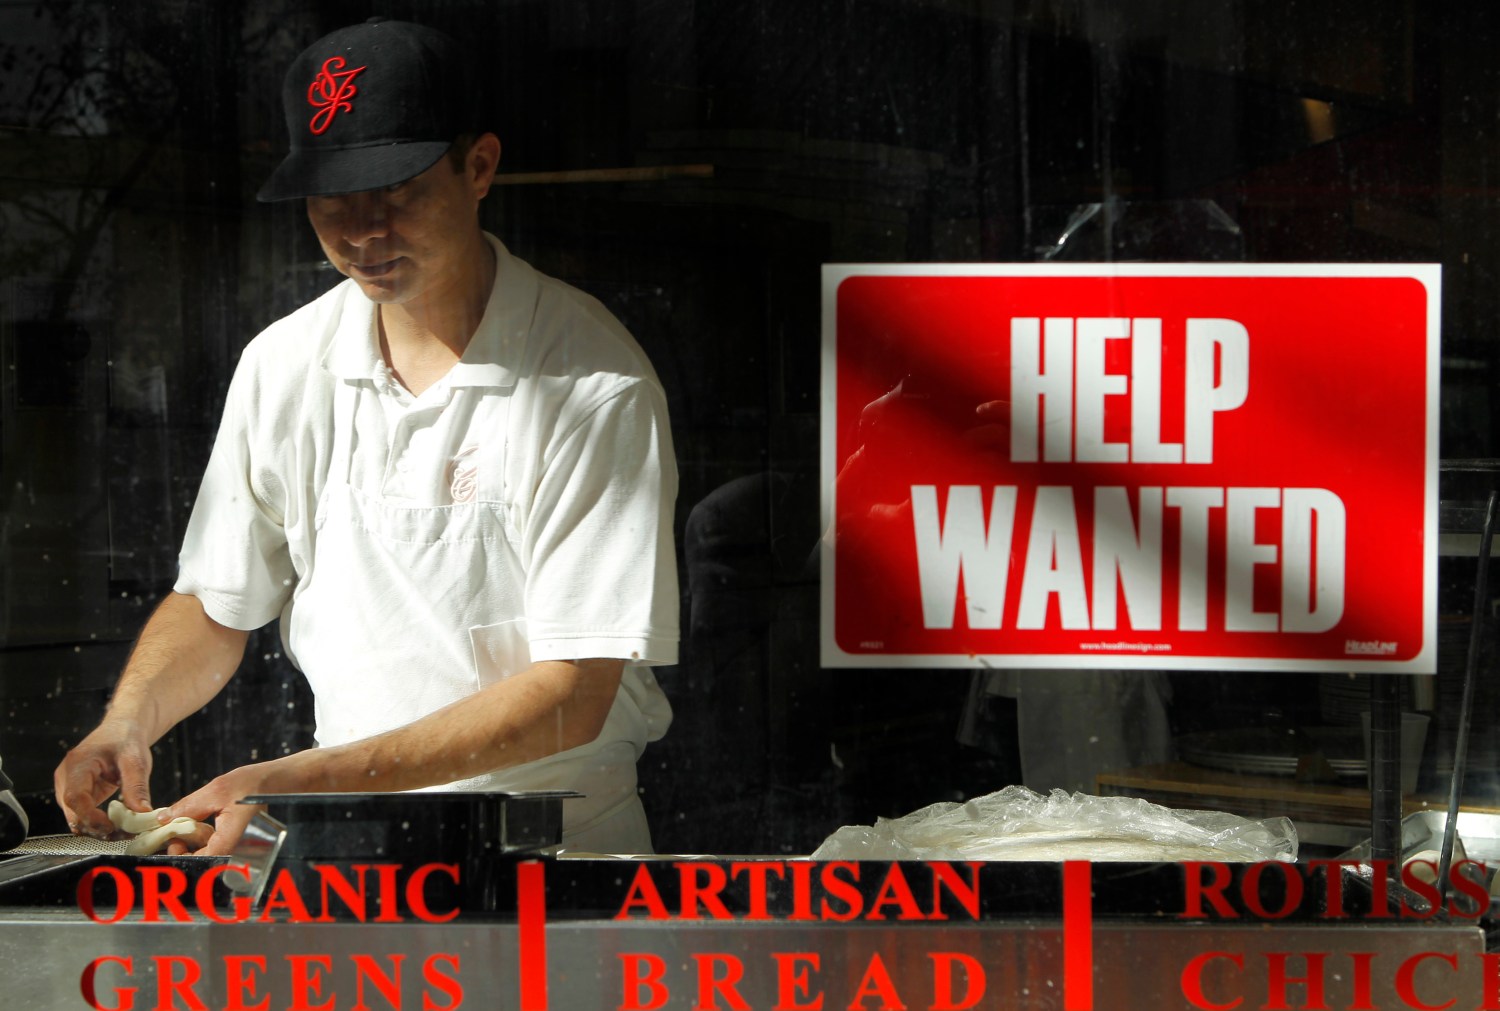 A man prepares a meal near a "help wanted" sign hanging in a restaurant window in San Francisco, California November 17, 2011.   REUTERS/Robert Galbraith  (UNITED STATES - Tags: BUSINESS EMPLOYMENT) - GM1E7BI0Y3E01